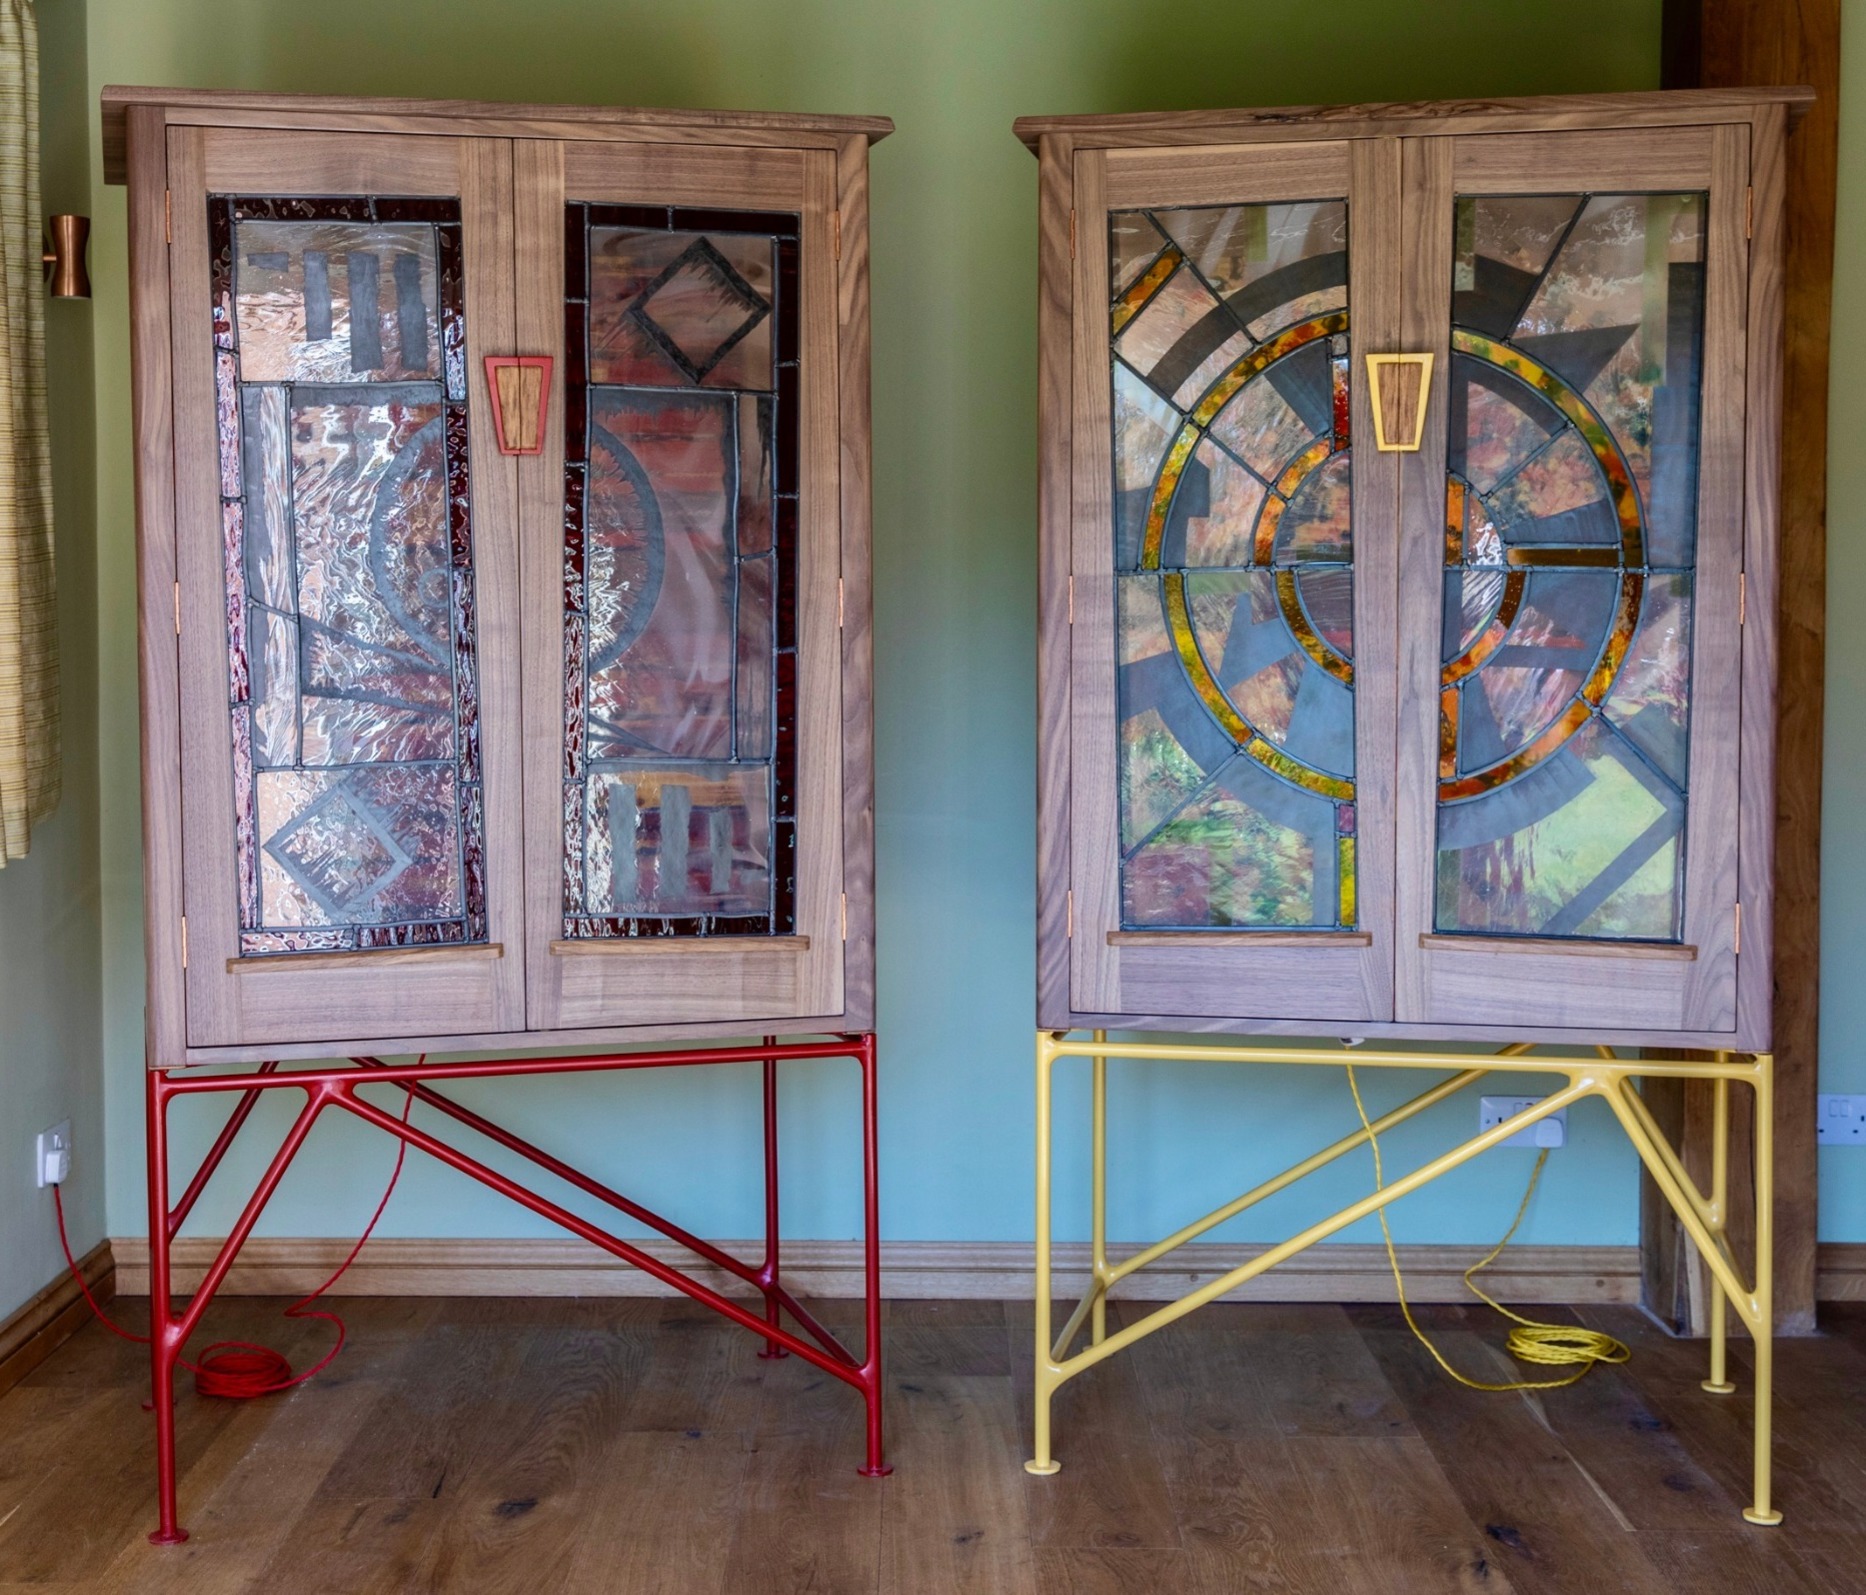 Tim Germain - A pair of gentleman's wardrobes in American black walnut and brown English oak with powder-coated steel legs (by Danny Sharp of Blunt Fabrications) and stained glass panels (by Danielle Hopkinson)